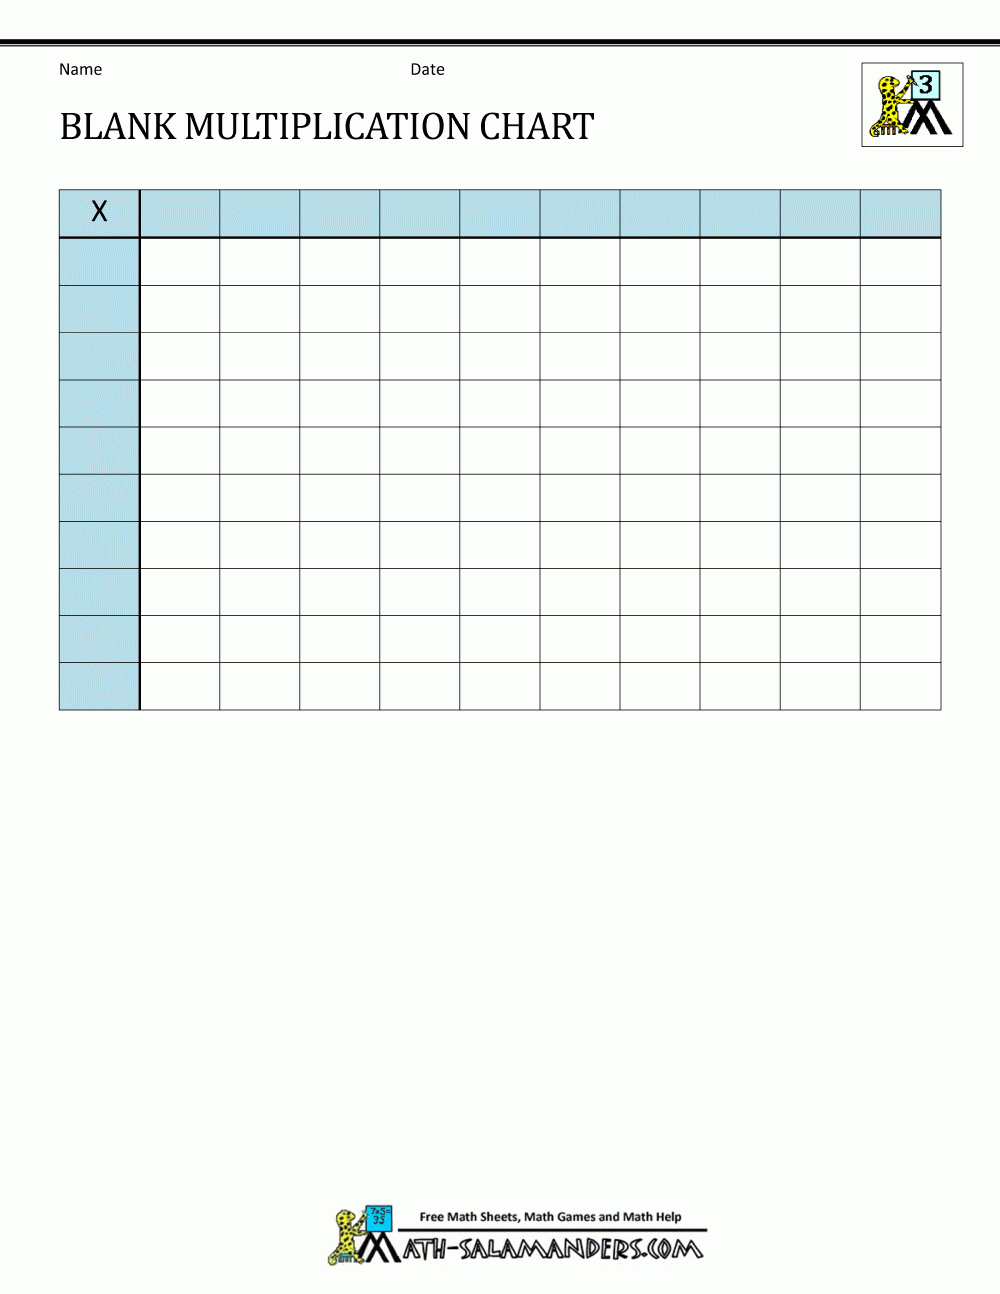 Blank Multiplication Chart Up To 10X10 regarding Printable Empty Multiplication Table